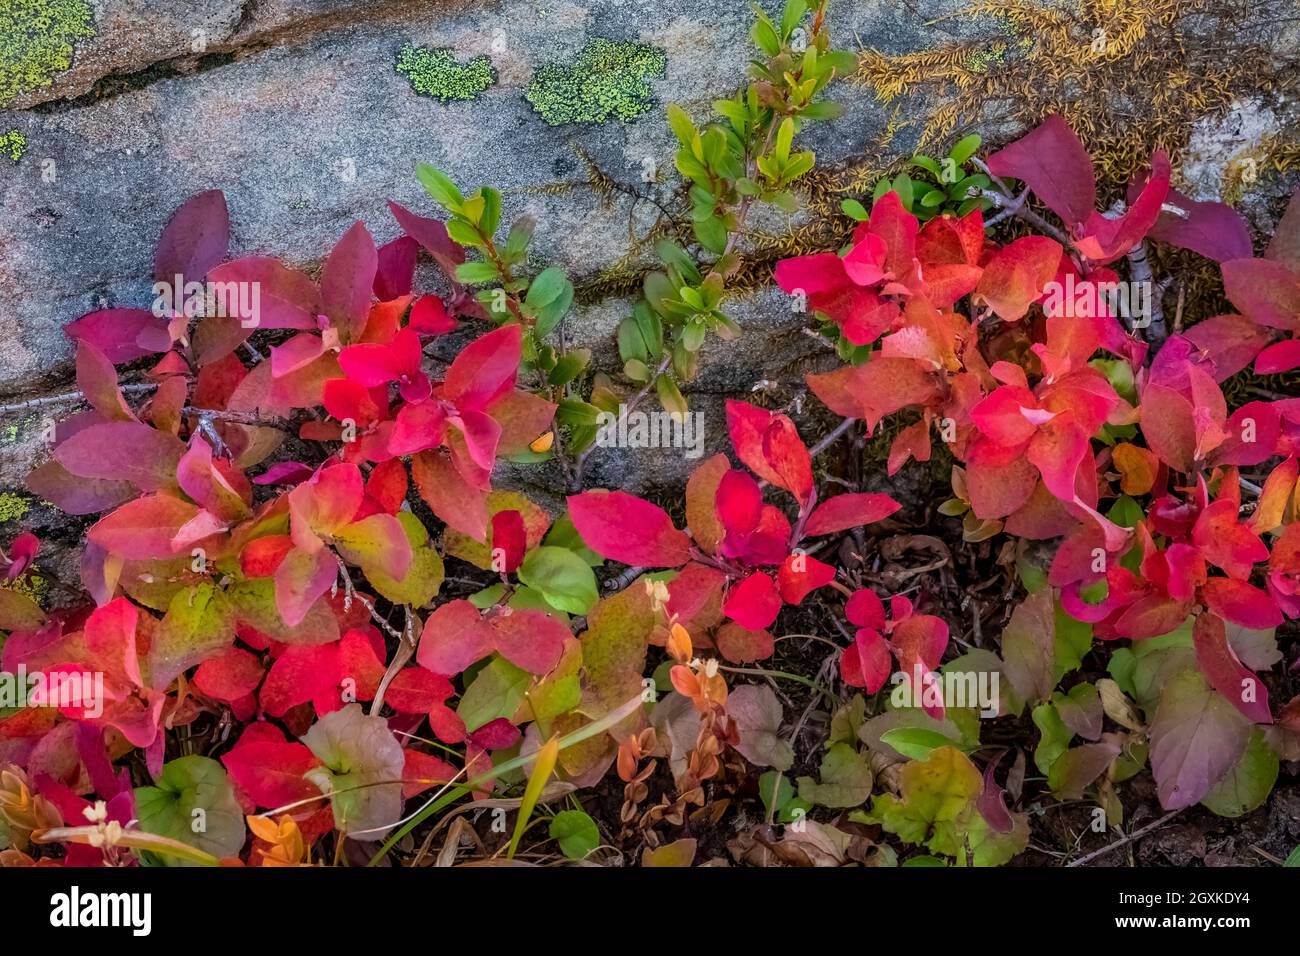 Dwarf Bilberry, Vaccinium cespitosum, in subalpine meadow along Grand Valley Trail in Obstruction Point area of Olympic National Park, Washington Stat Stock Photo